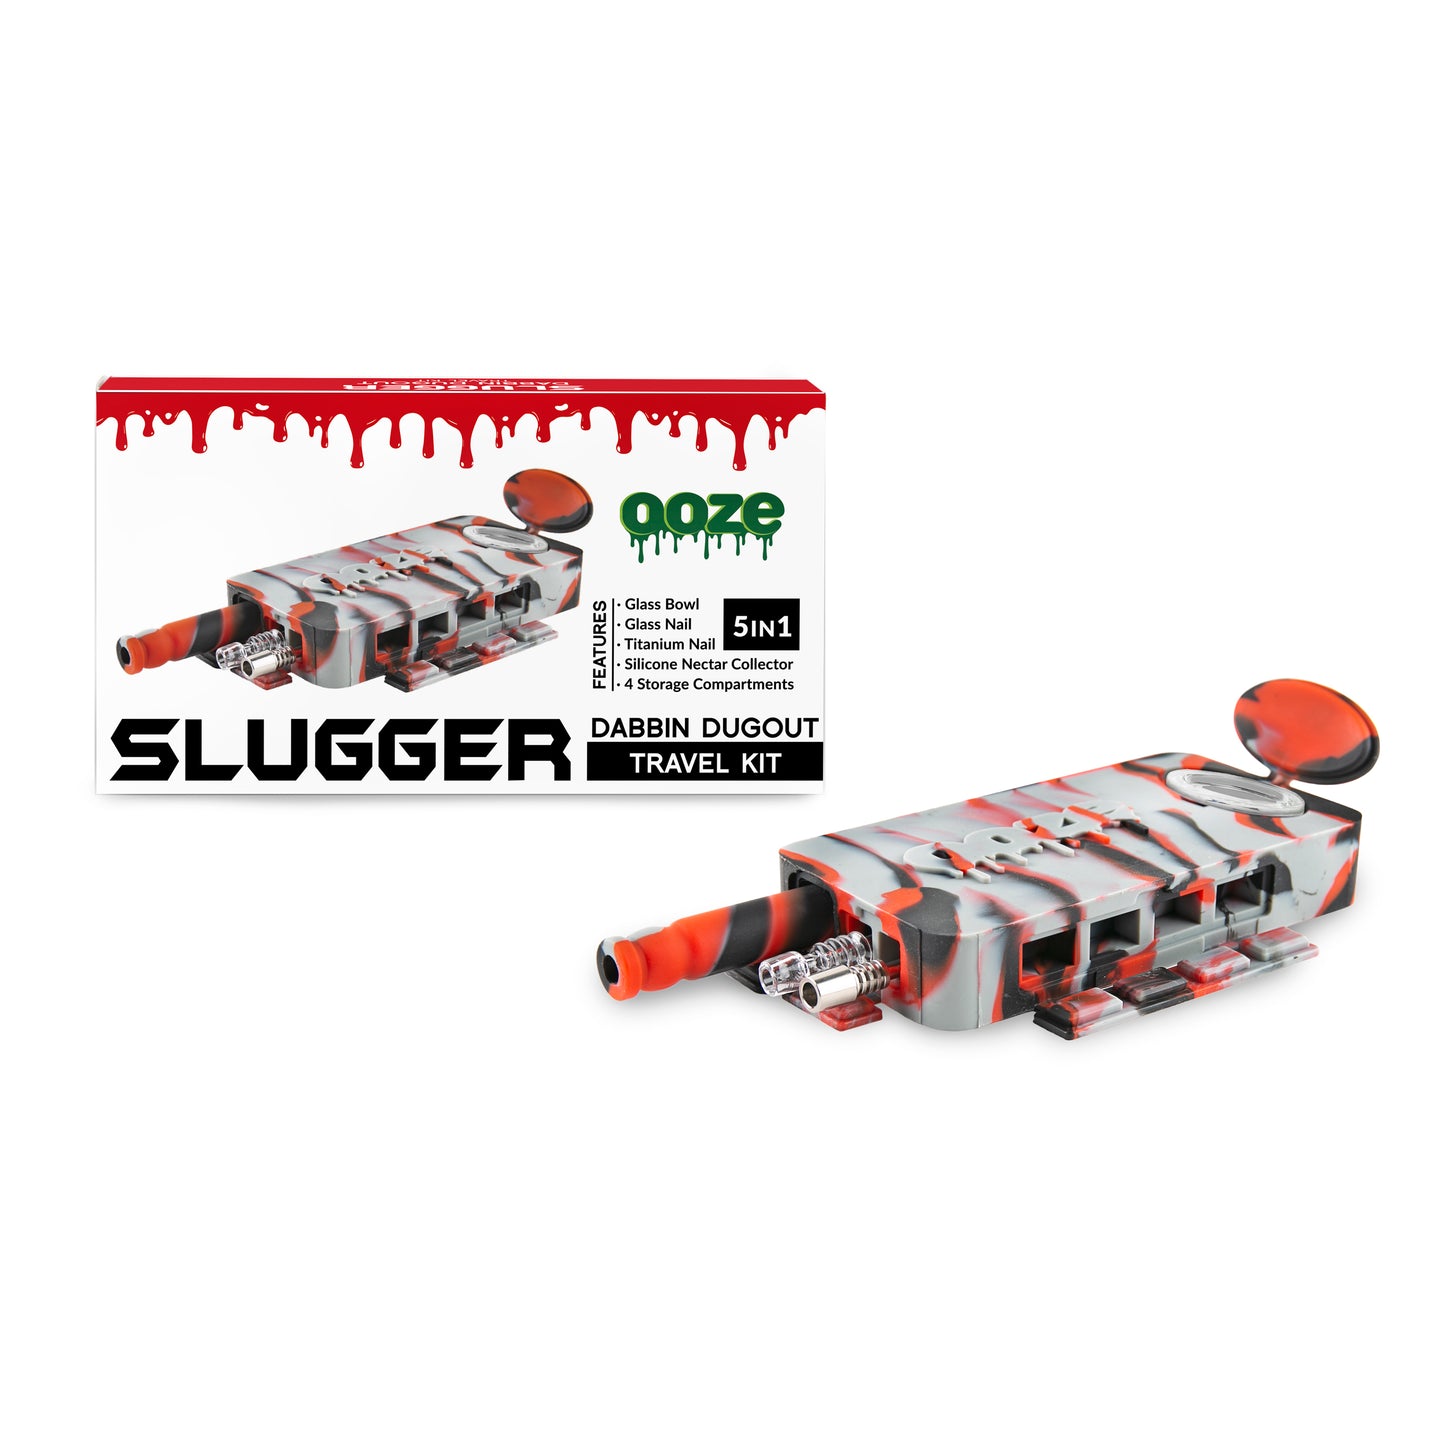 Ooze Slugger Dabbin' Dugout Silicone Travel Dab Kit - After Midnight